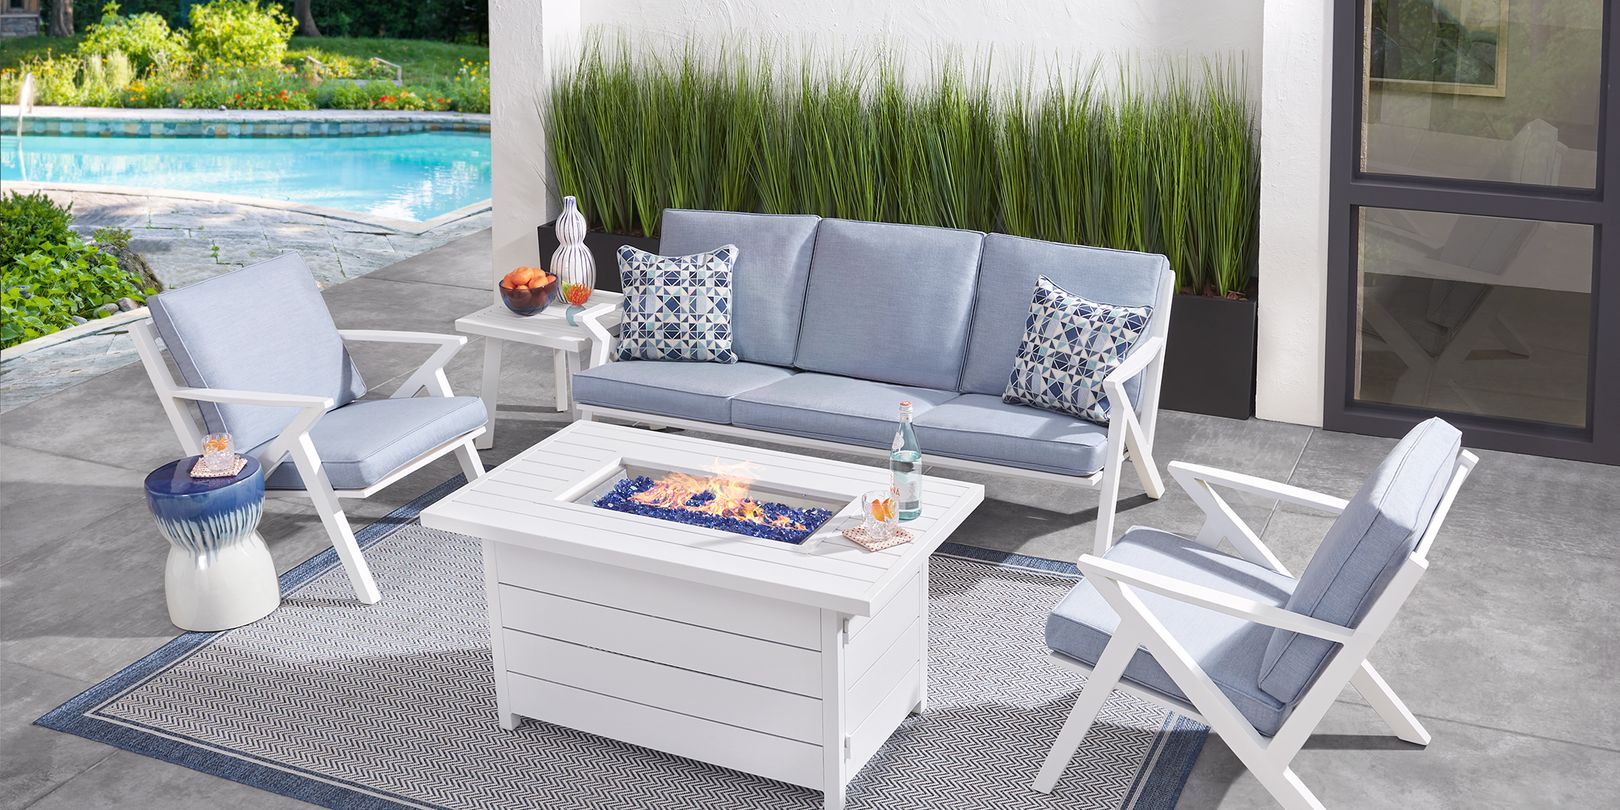 Photo of a white patio seating set with blue cushions and a fire pit table